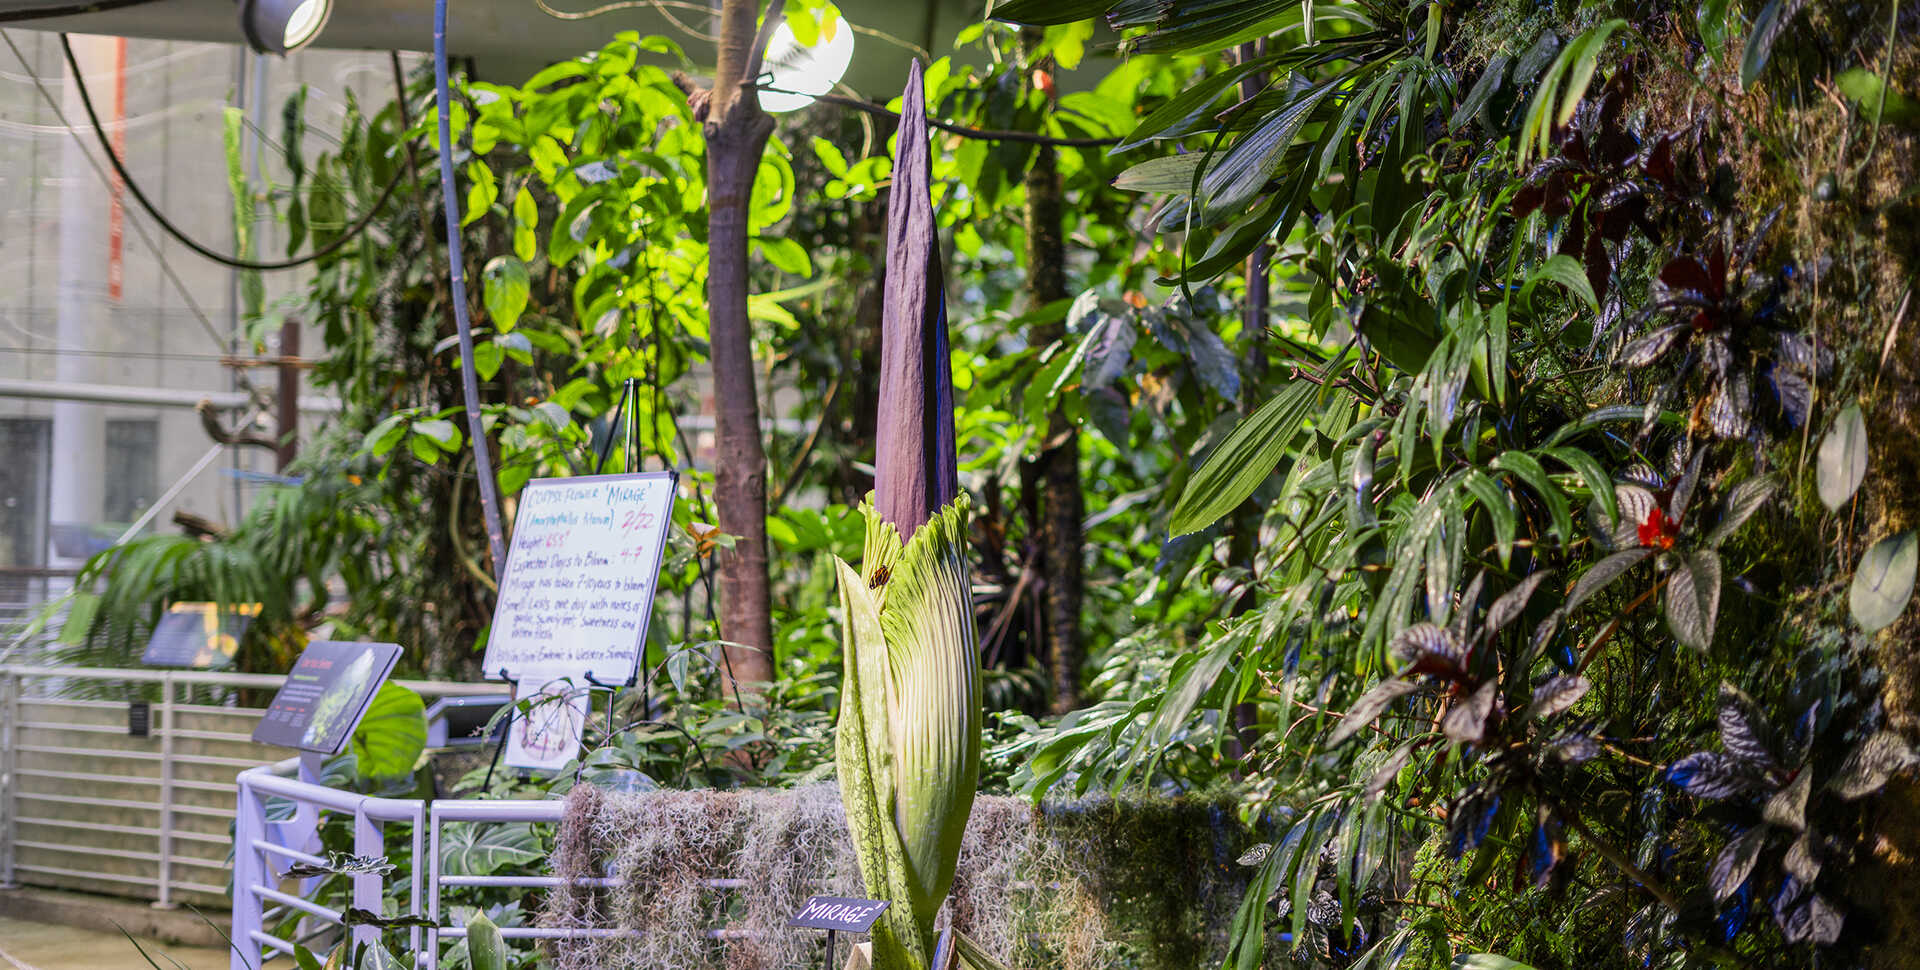 Mirage the corpse flower in Osher Rainforest at the Academy